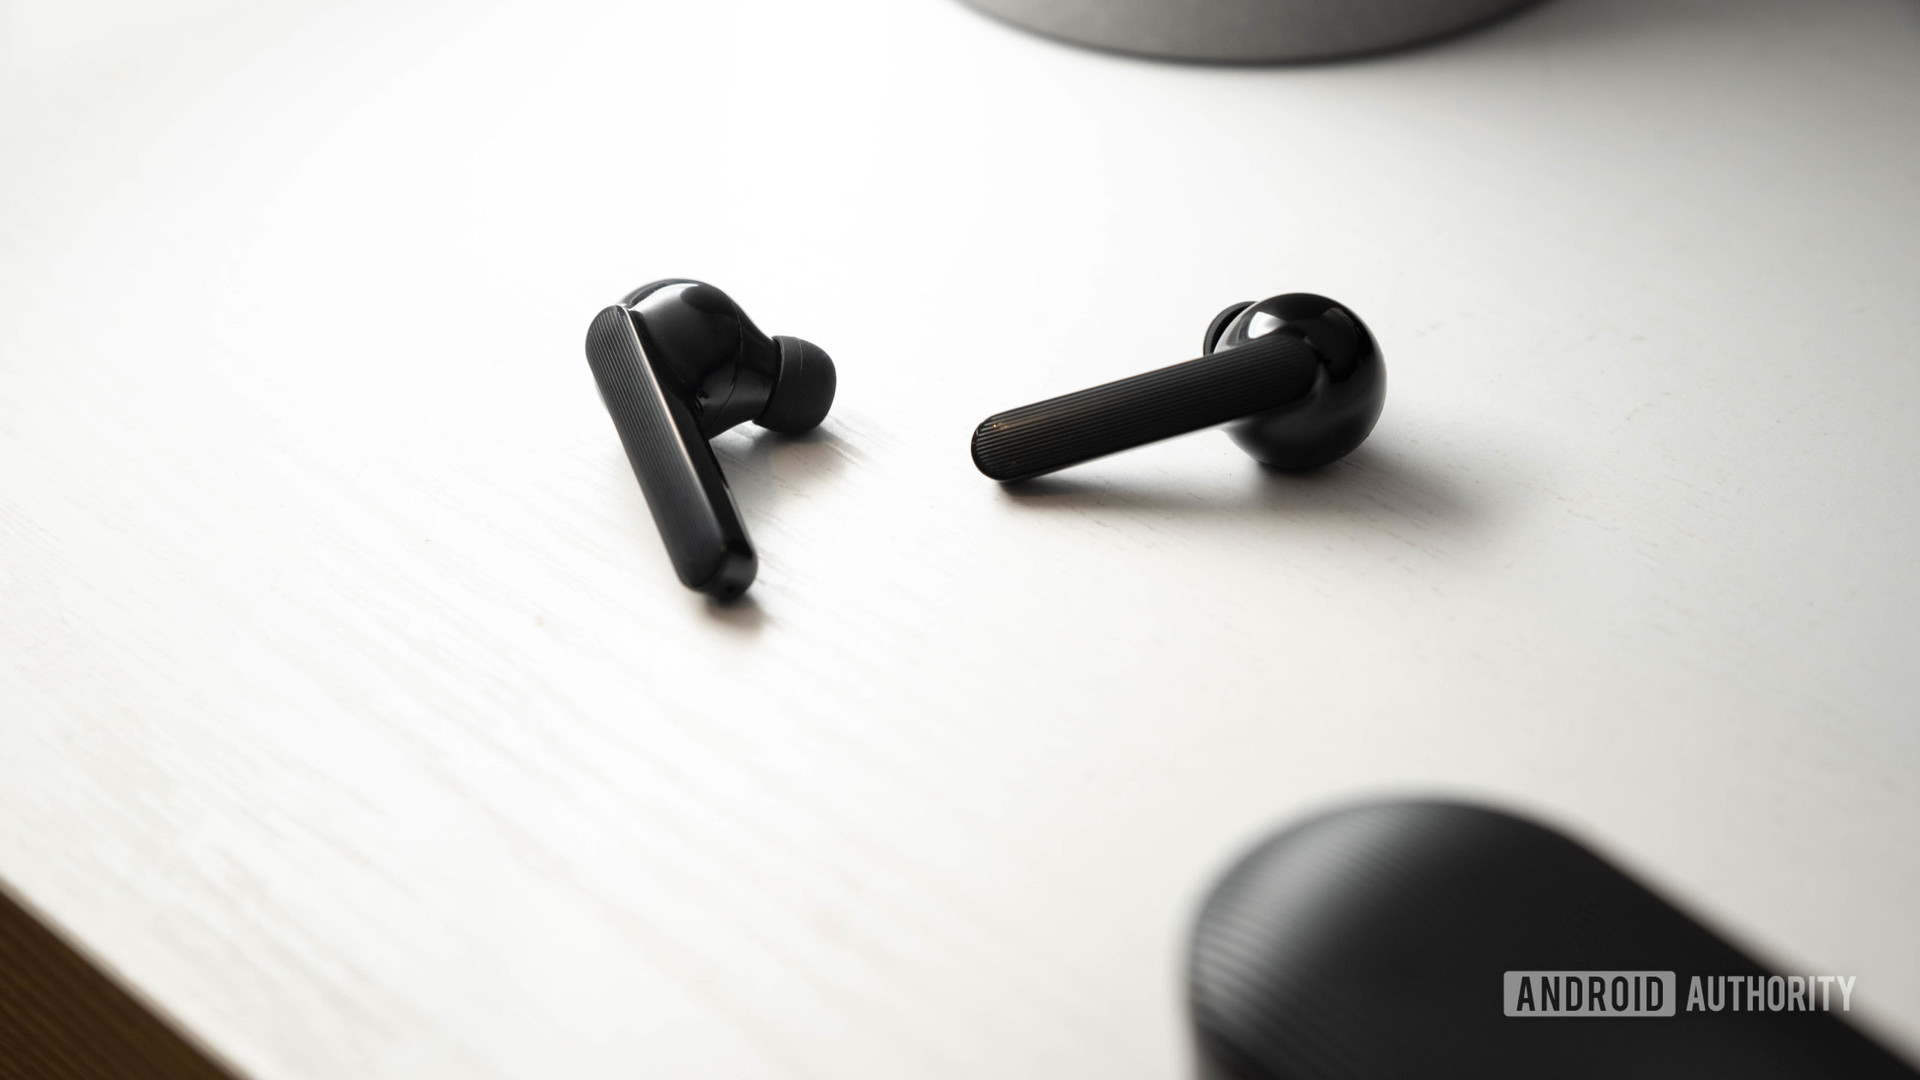 The Mobvoi Earbuds Gesture true wireless earbuds in black against a white surface.